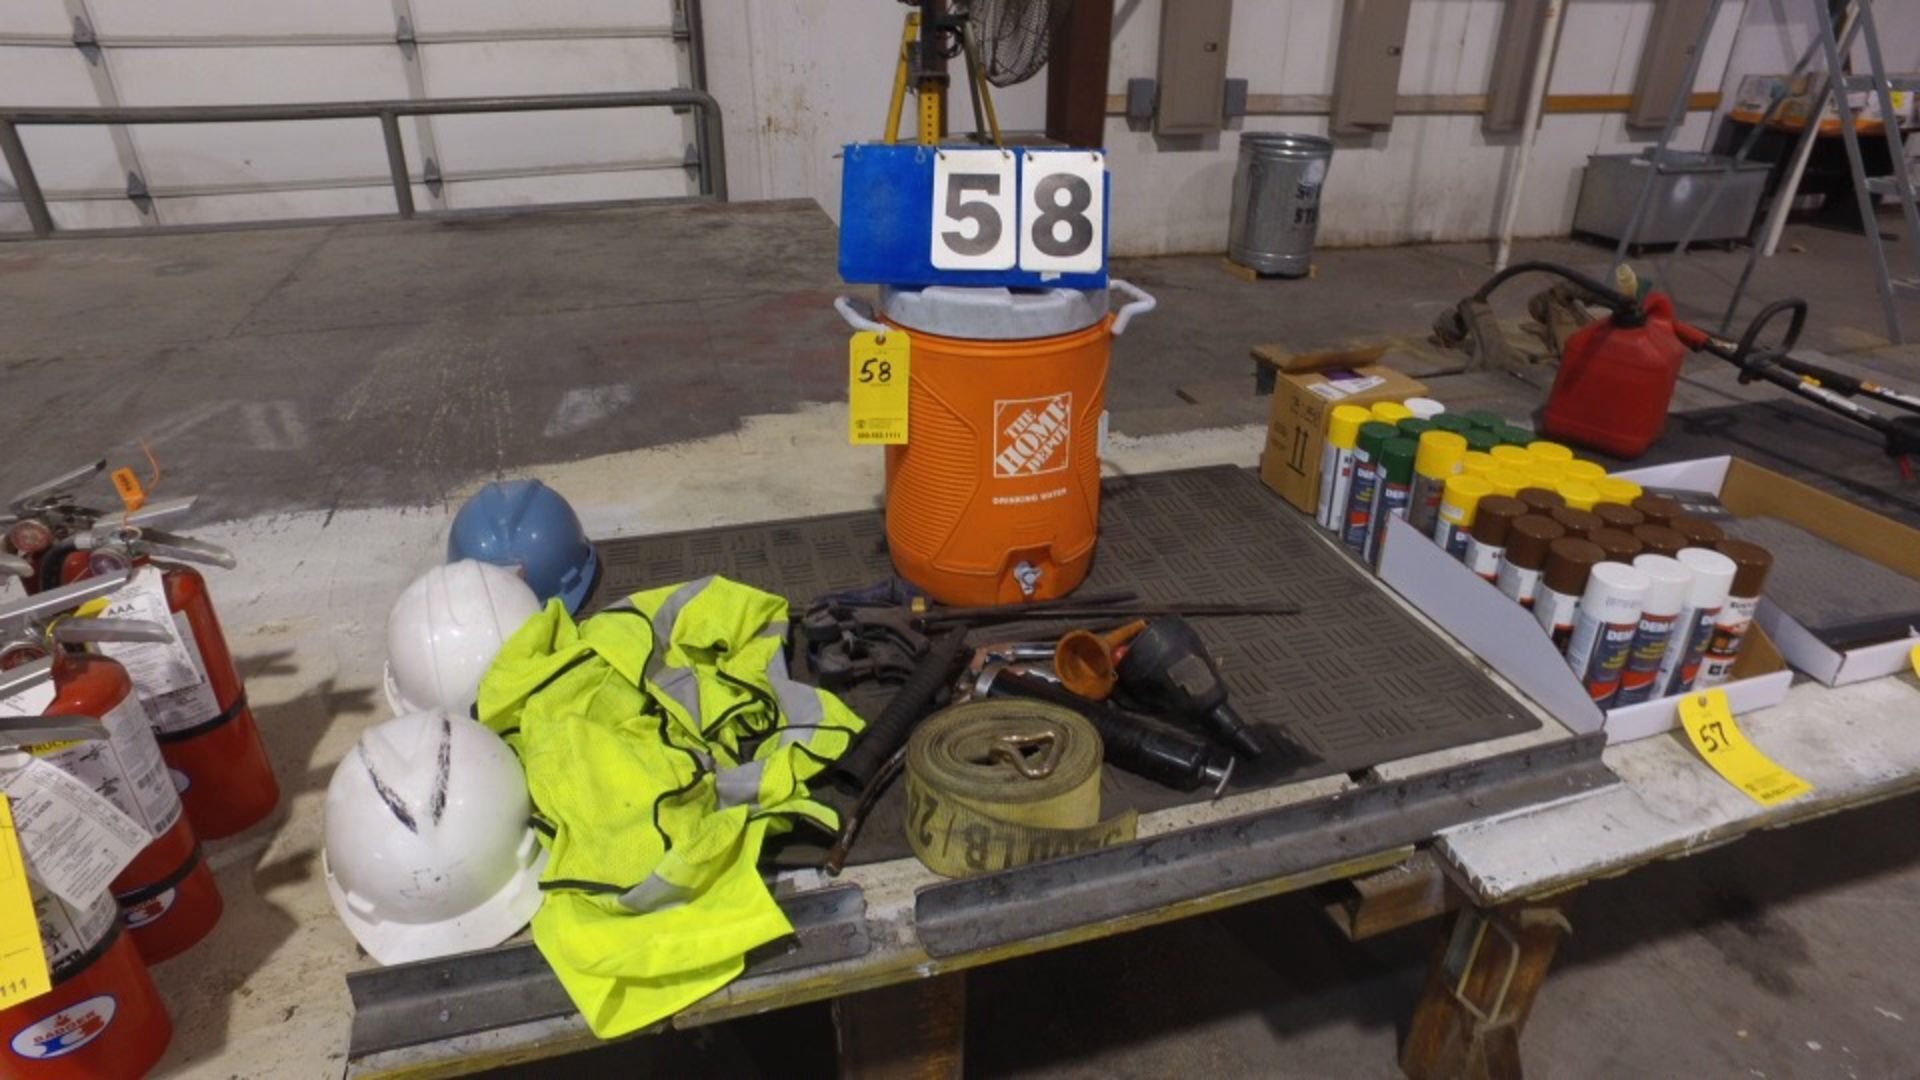 HARD HATS, SAFETY VESTS, CLAMPS, MISC